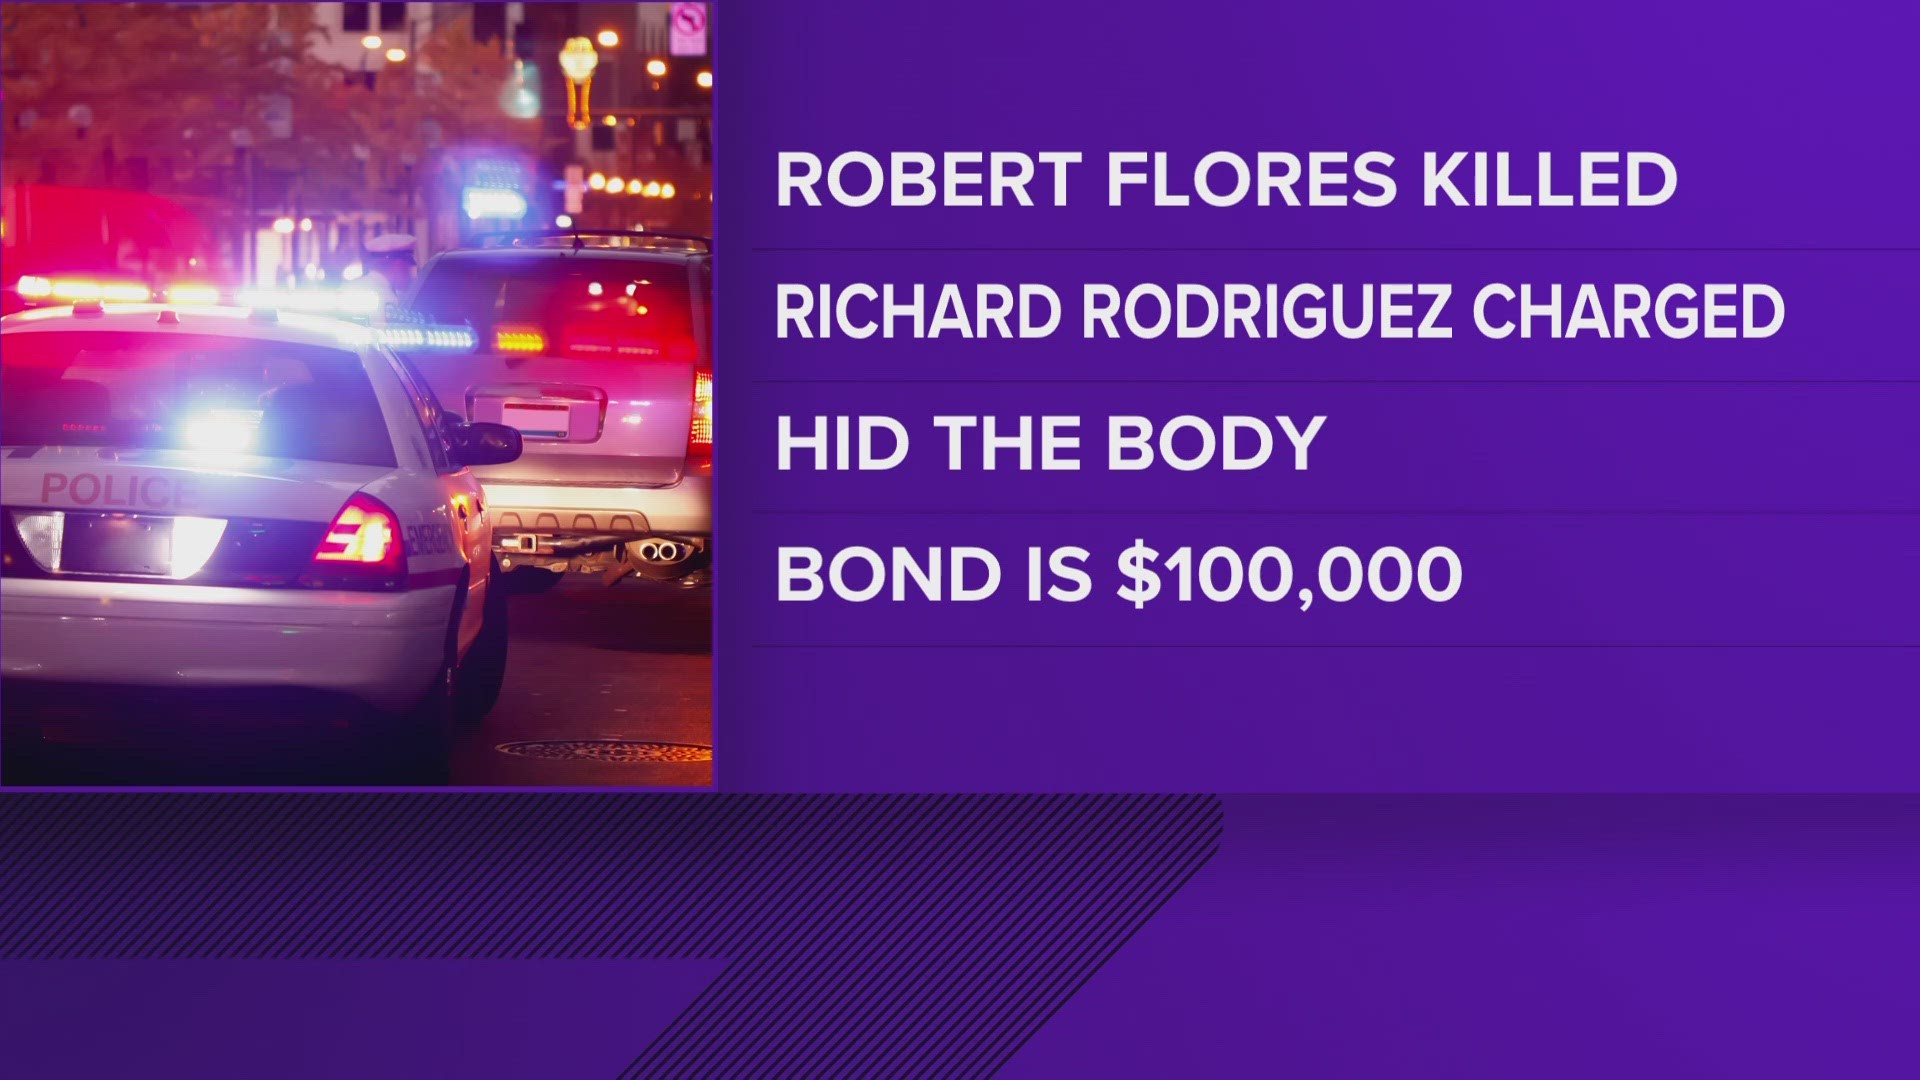 Investigators say Roberto Flores was killed back in June 2019 during an argument regarding a cell phone.